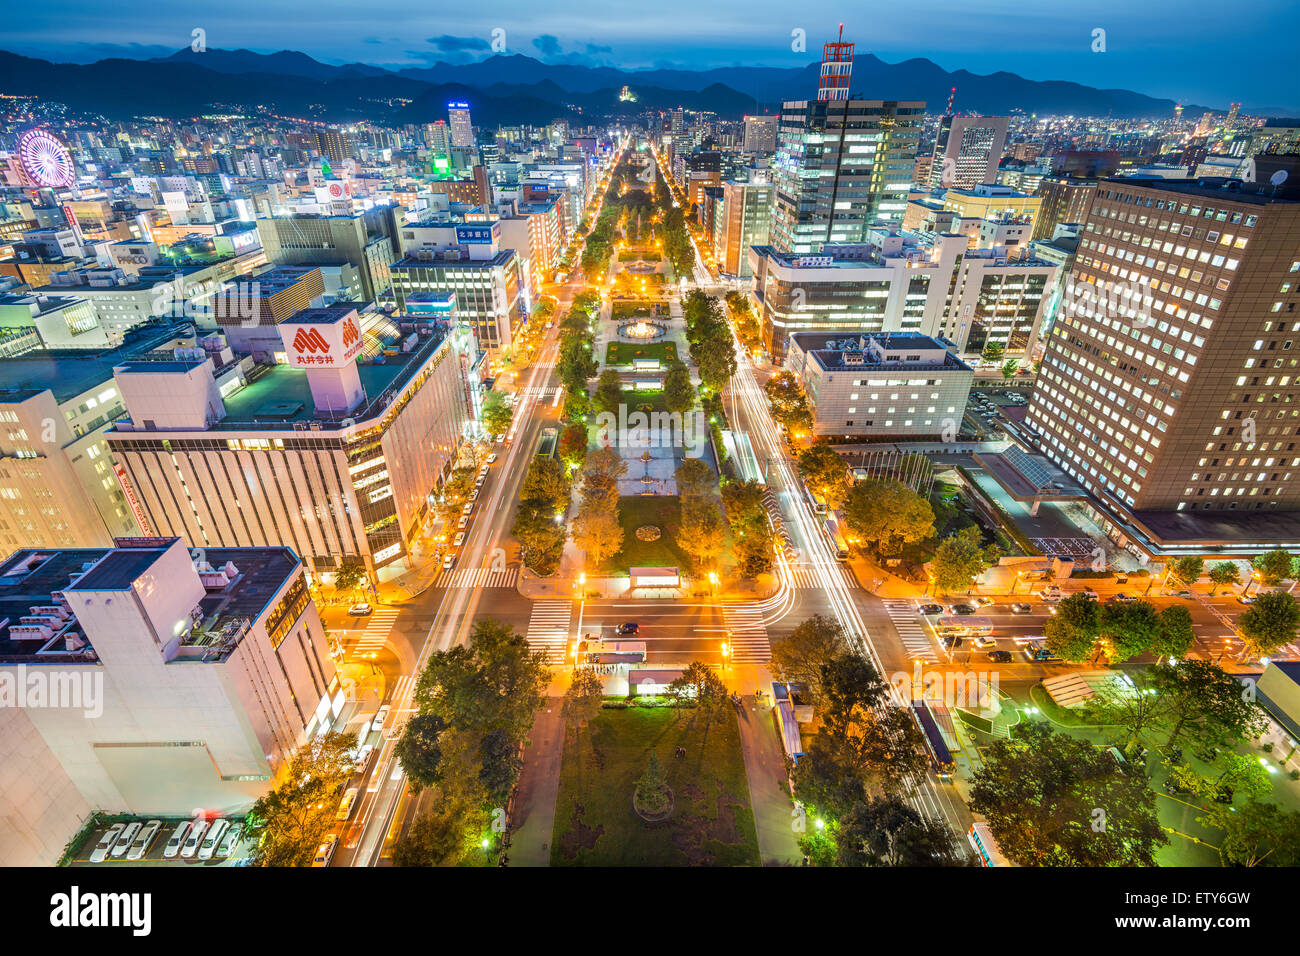 SAPPORO, JAPAN - OCTOBER 16, 2012: Sapporo cityscape over Odori Park. The city is the larges in Hokkaido. Stock Photo